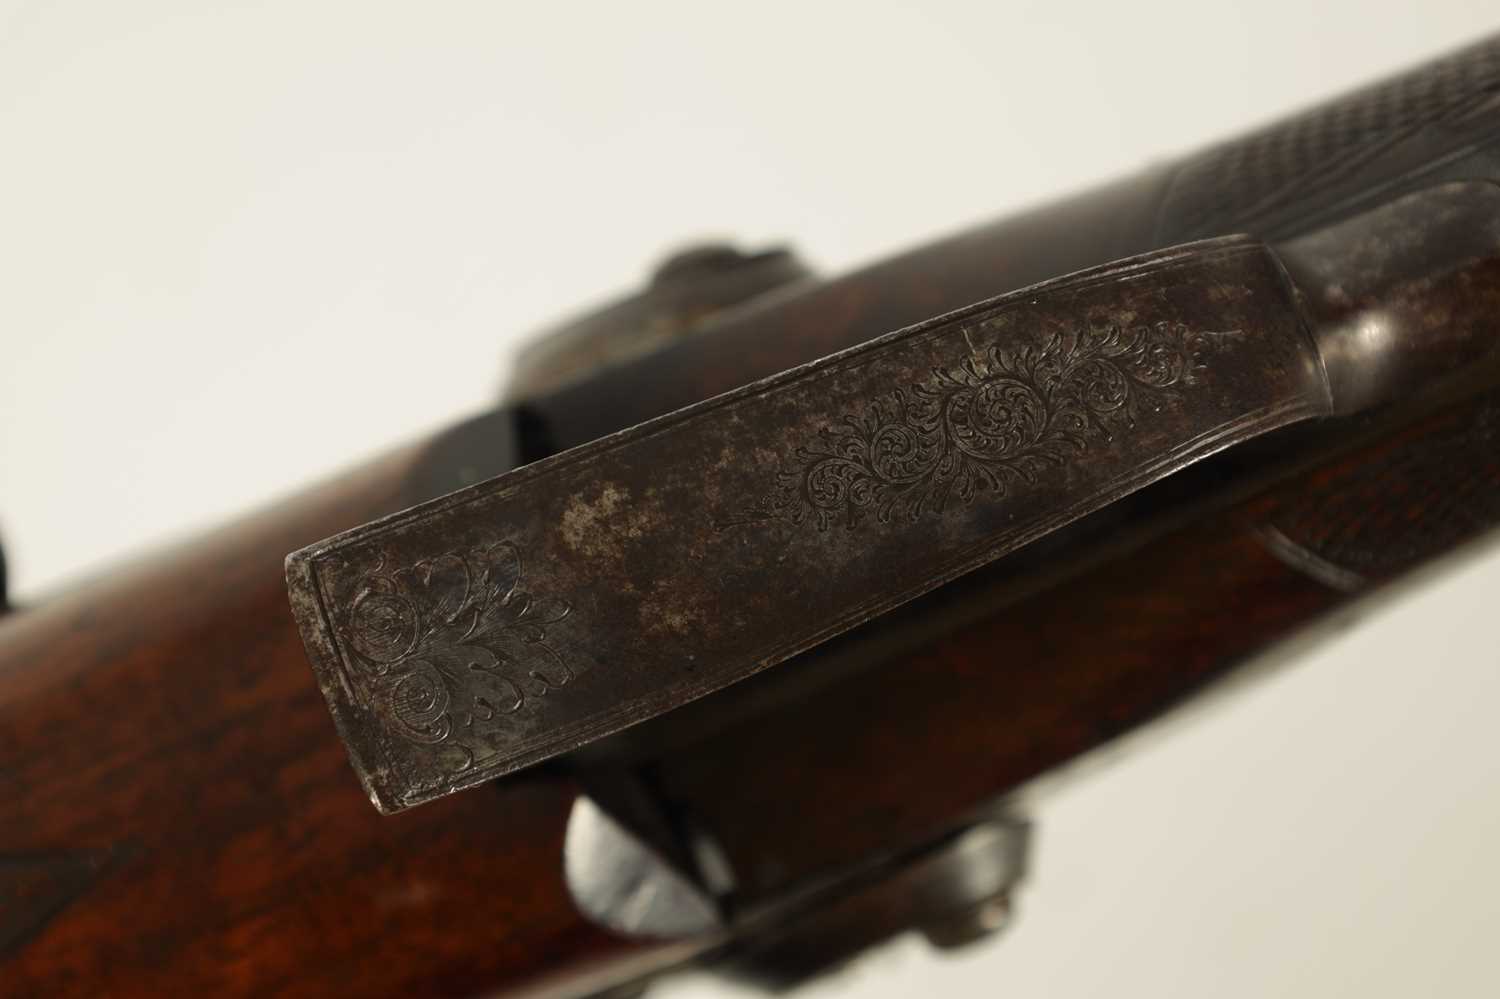 GILBY PATENT, A RARE 19TH CENTURY DOUBLE PERCUSSION BREACH LOADING RIFLE - Image 11 of 16